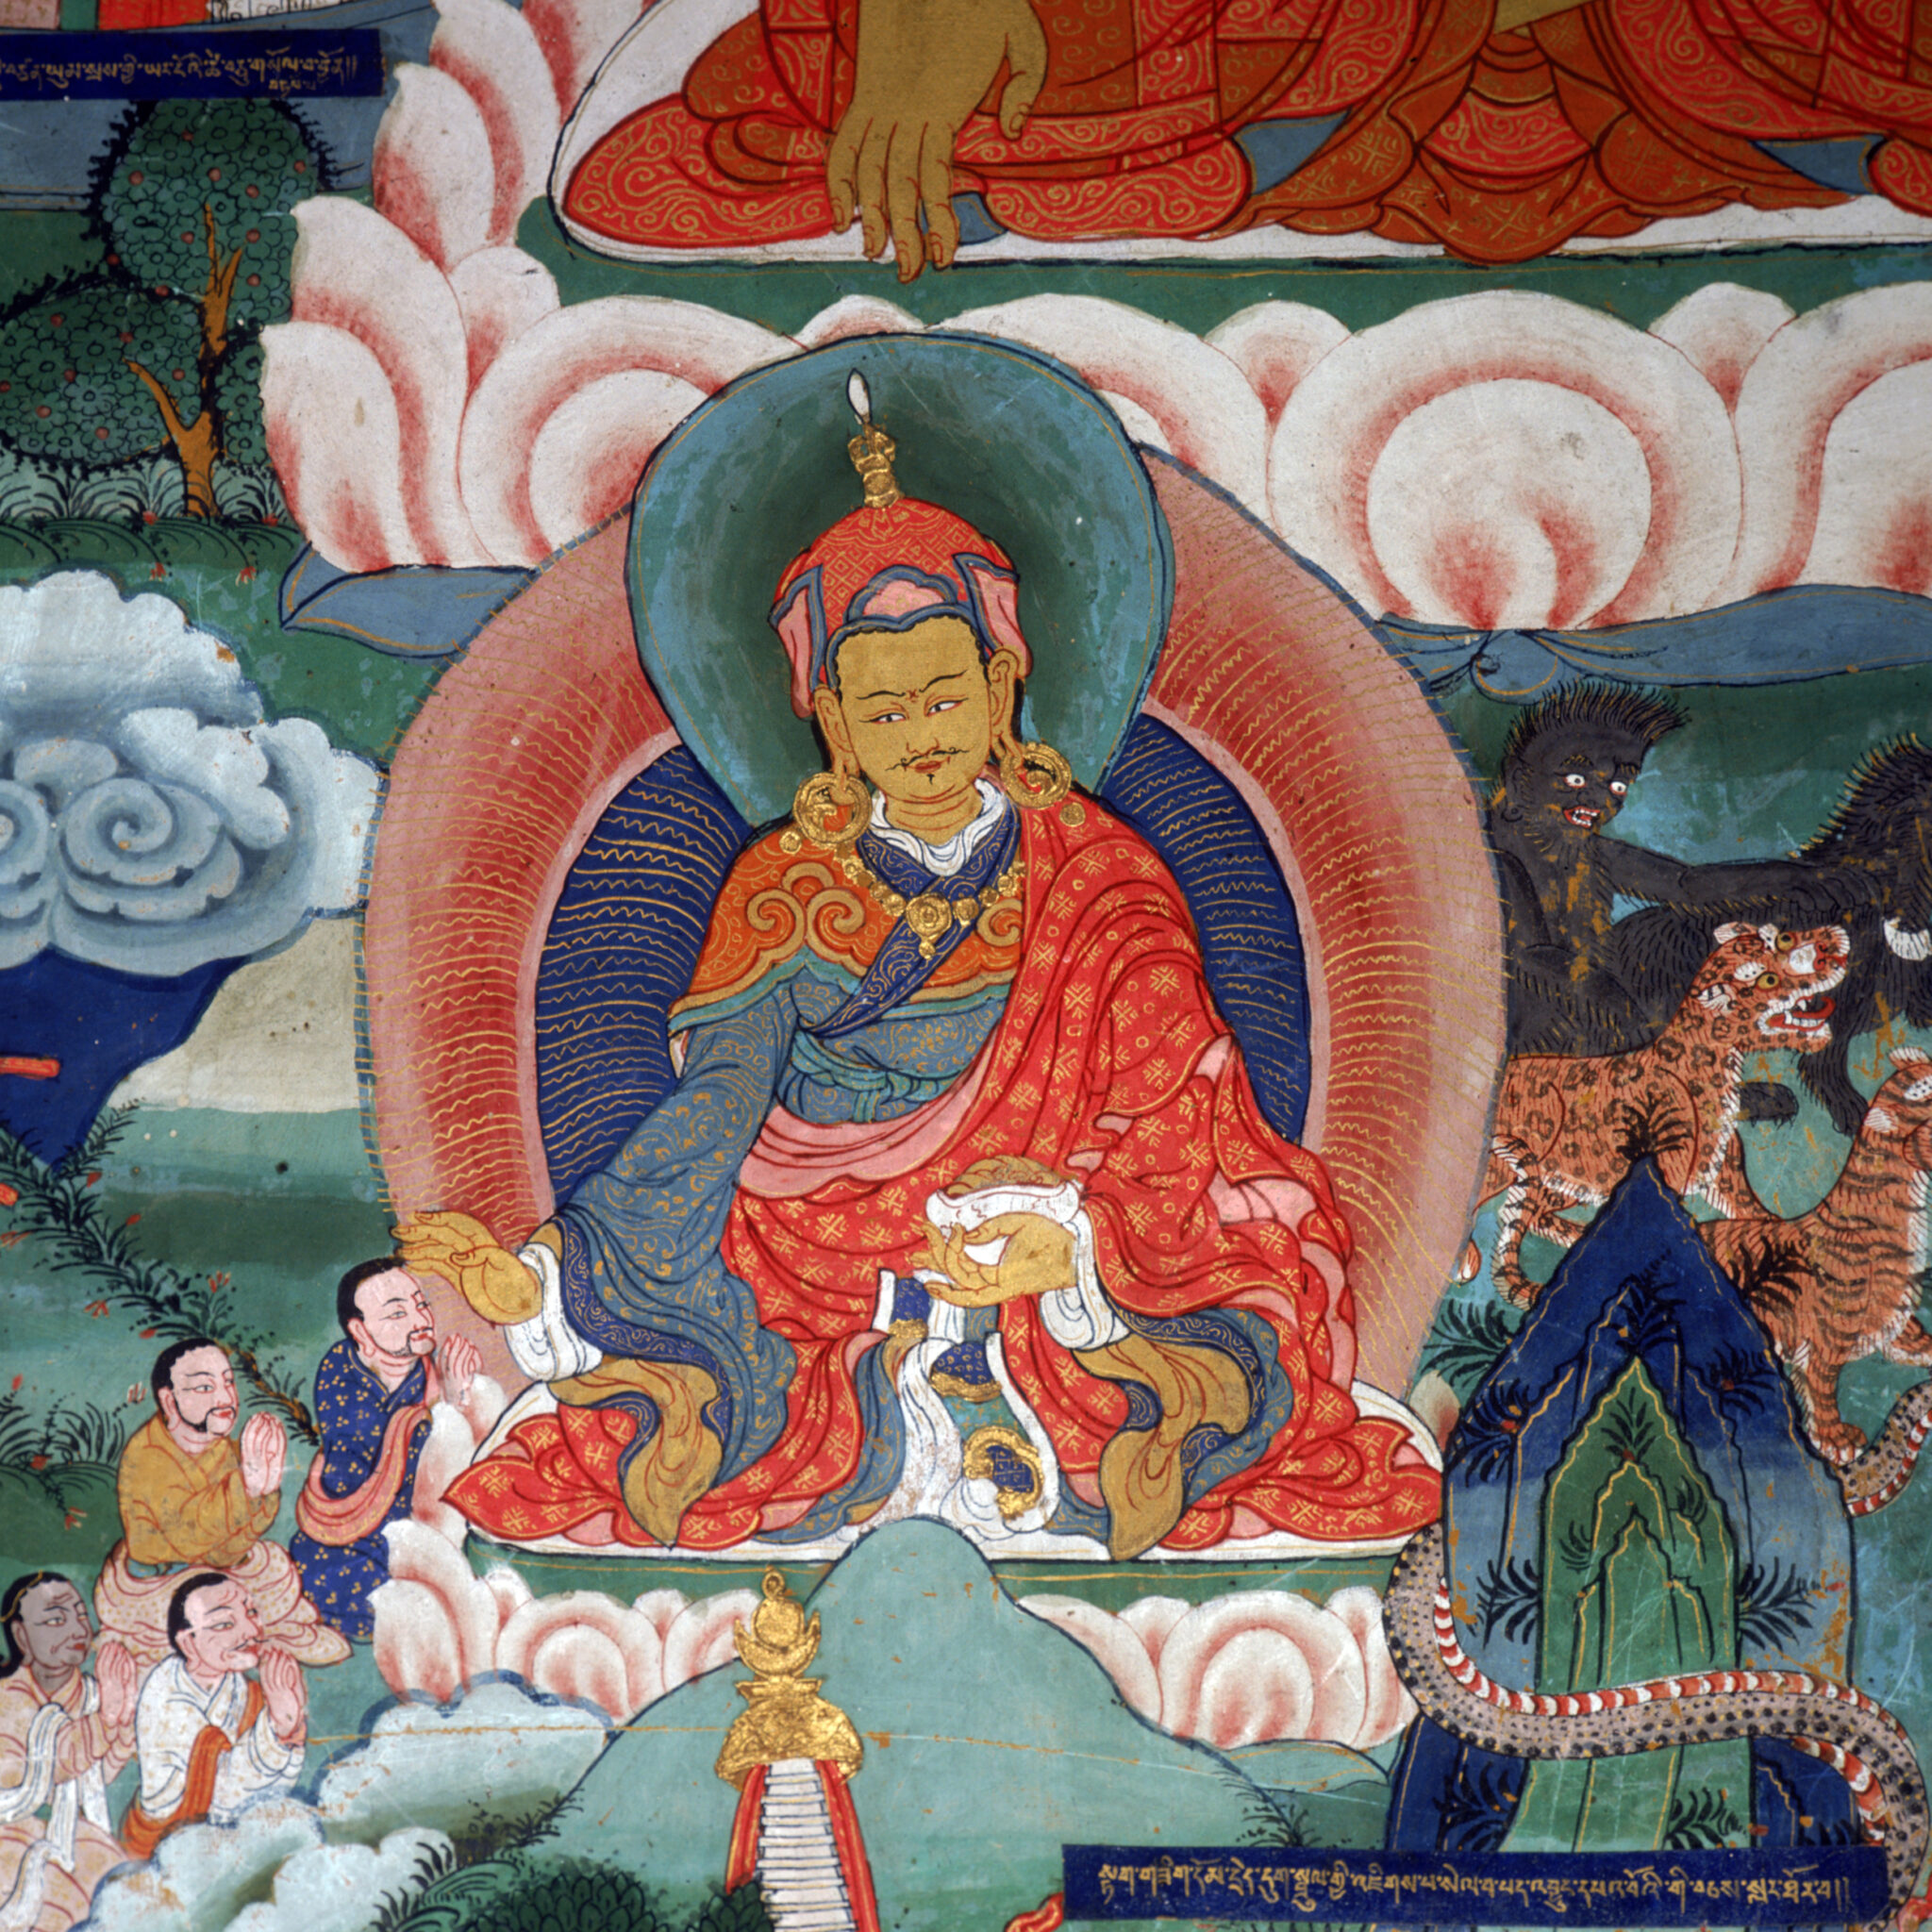 Guru wearing gold and red brocade robe flanked by attendants at left, herd of animals at right